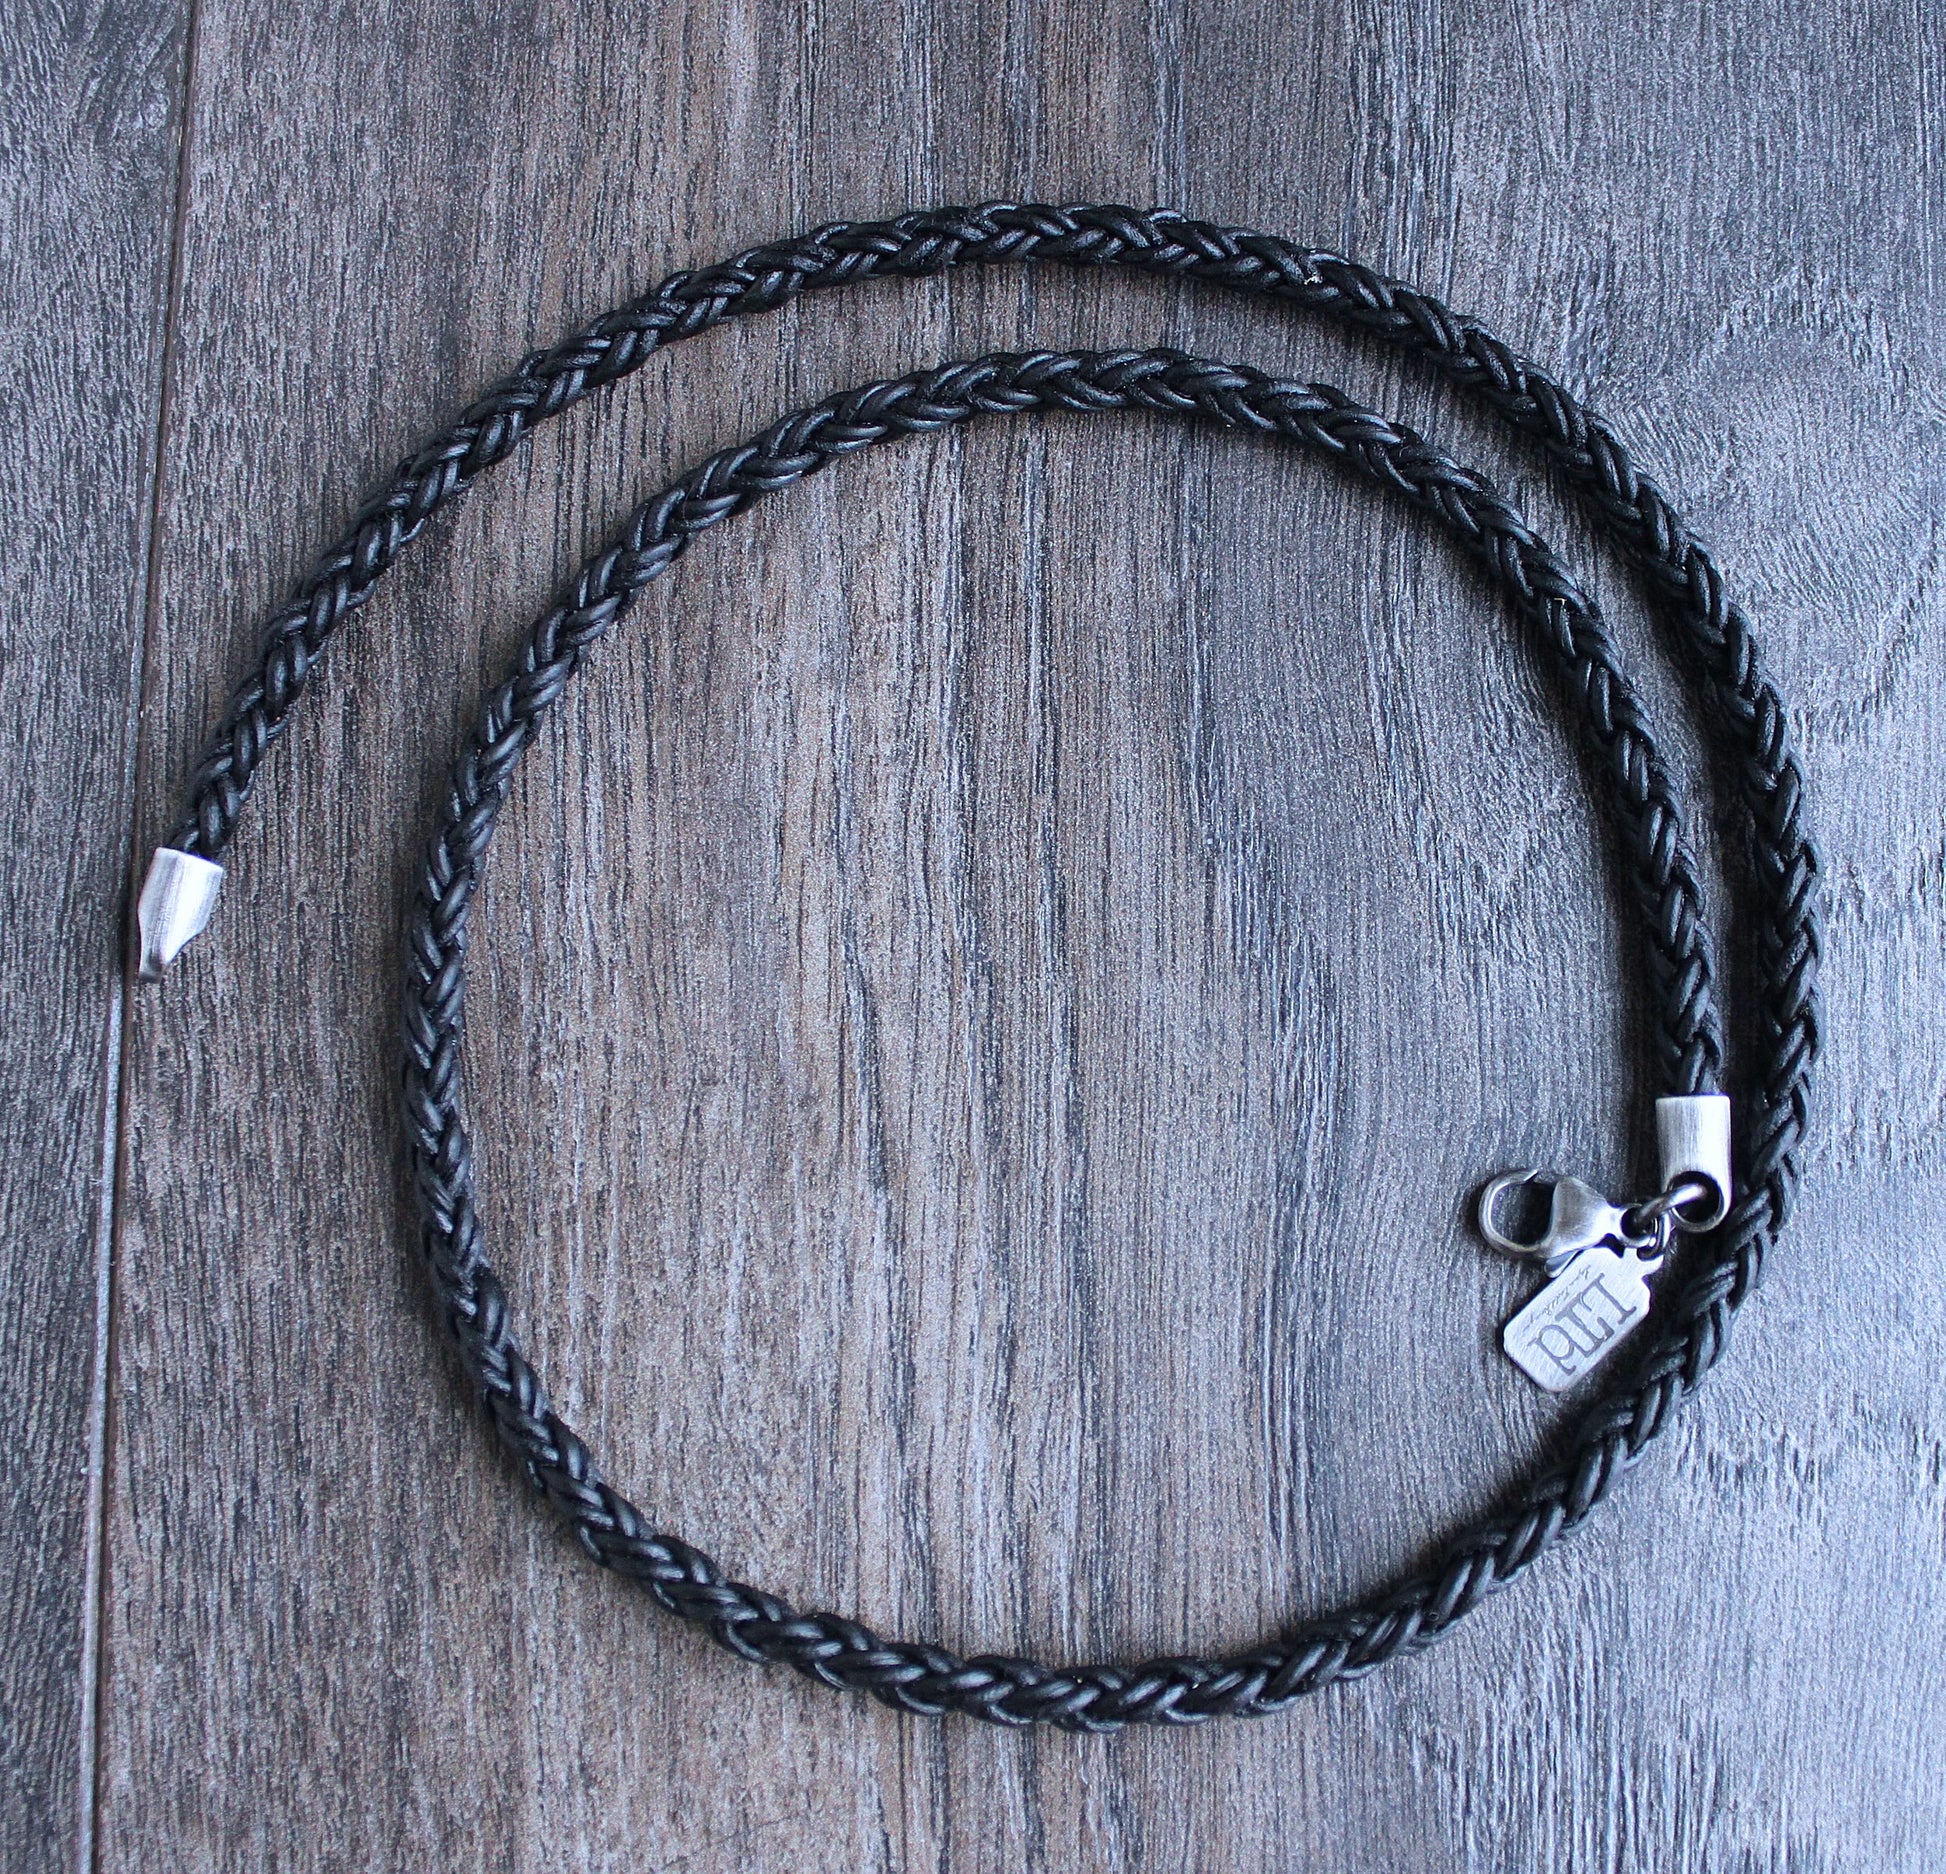 Leather Neck Cord with Sterling Silver Clasp